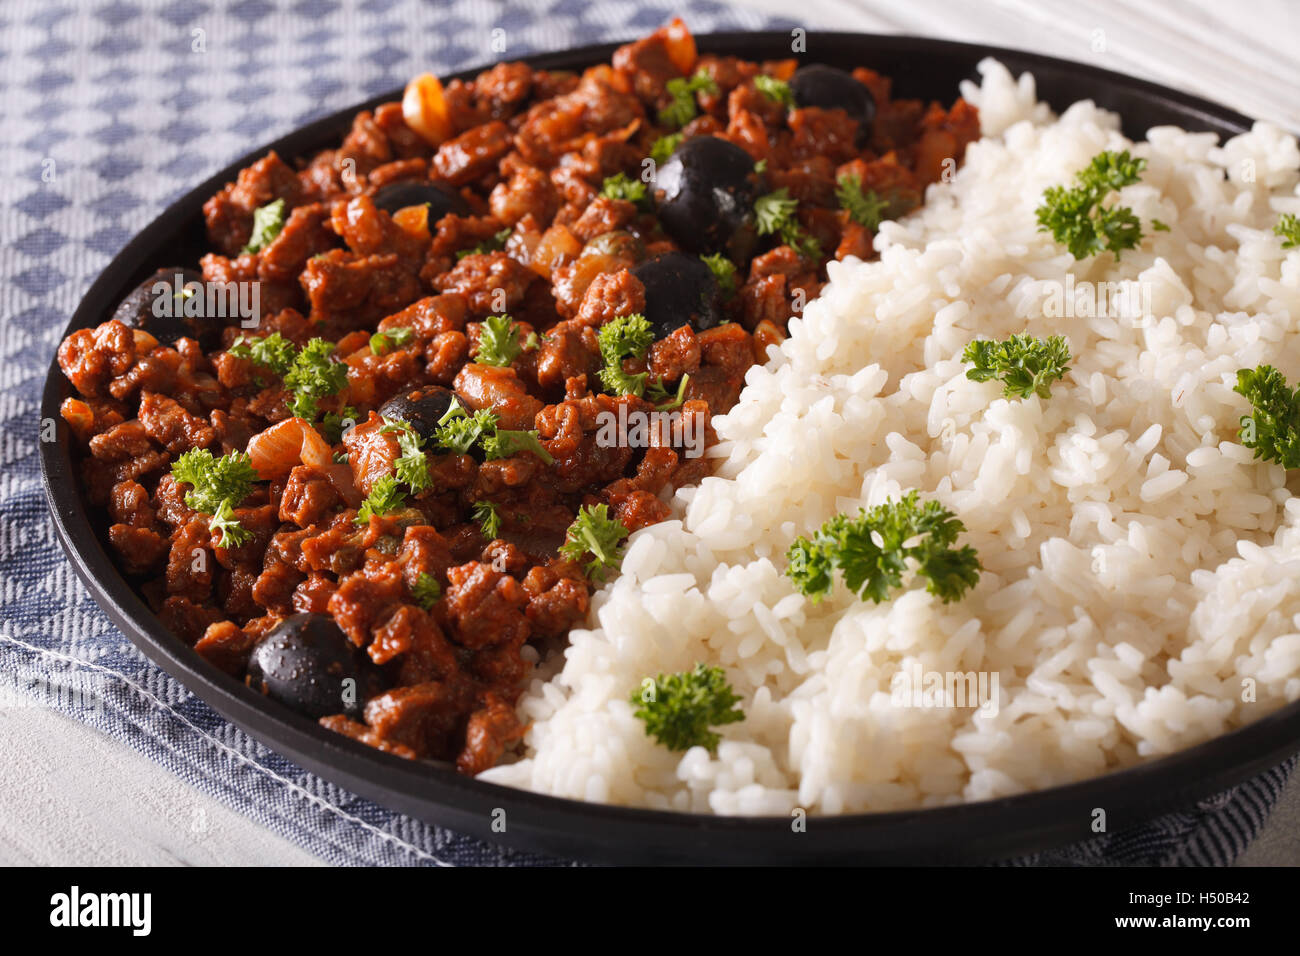 Cuban food: Picadillo a la habanera with a side dish of rice close-up on a plate. horizontal Stock Photo